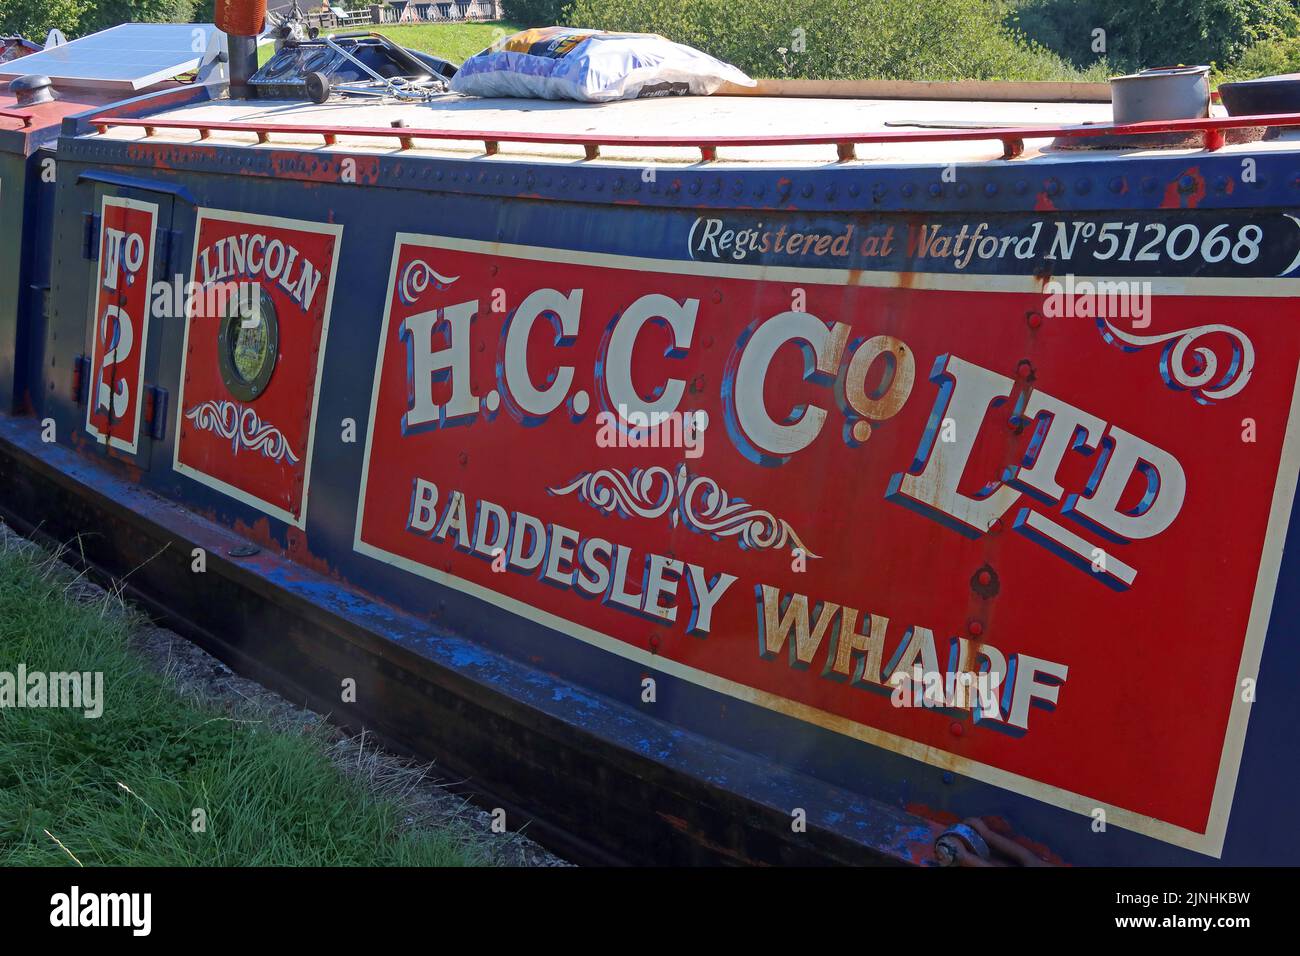 Lincoln No2 HCC Co Ltd Baddesley Wharf barge at Nantwich Marina, Basin End, Chester Road, Nantwich, Cheshire, England, CW5 8LB Stock Photo